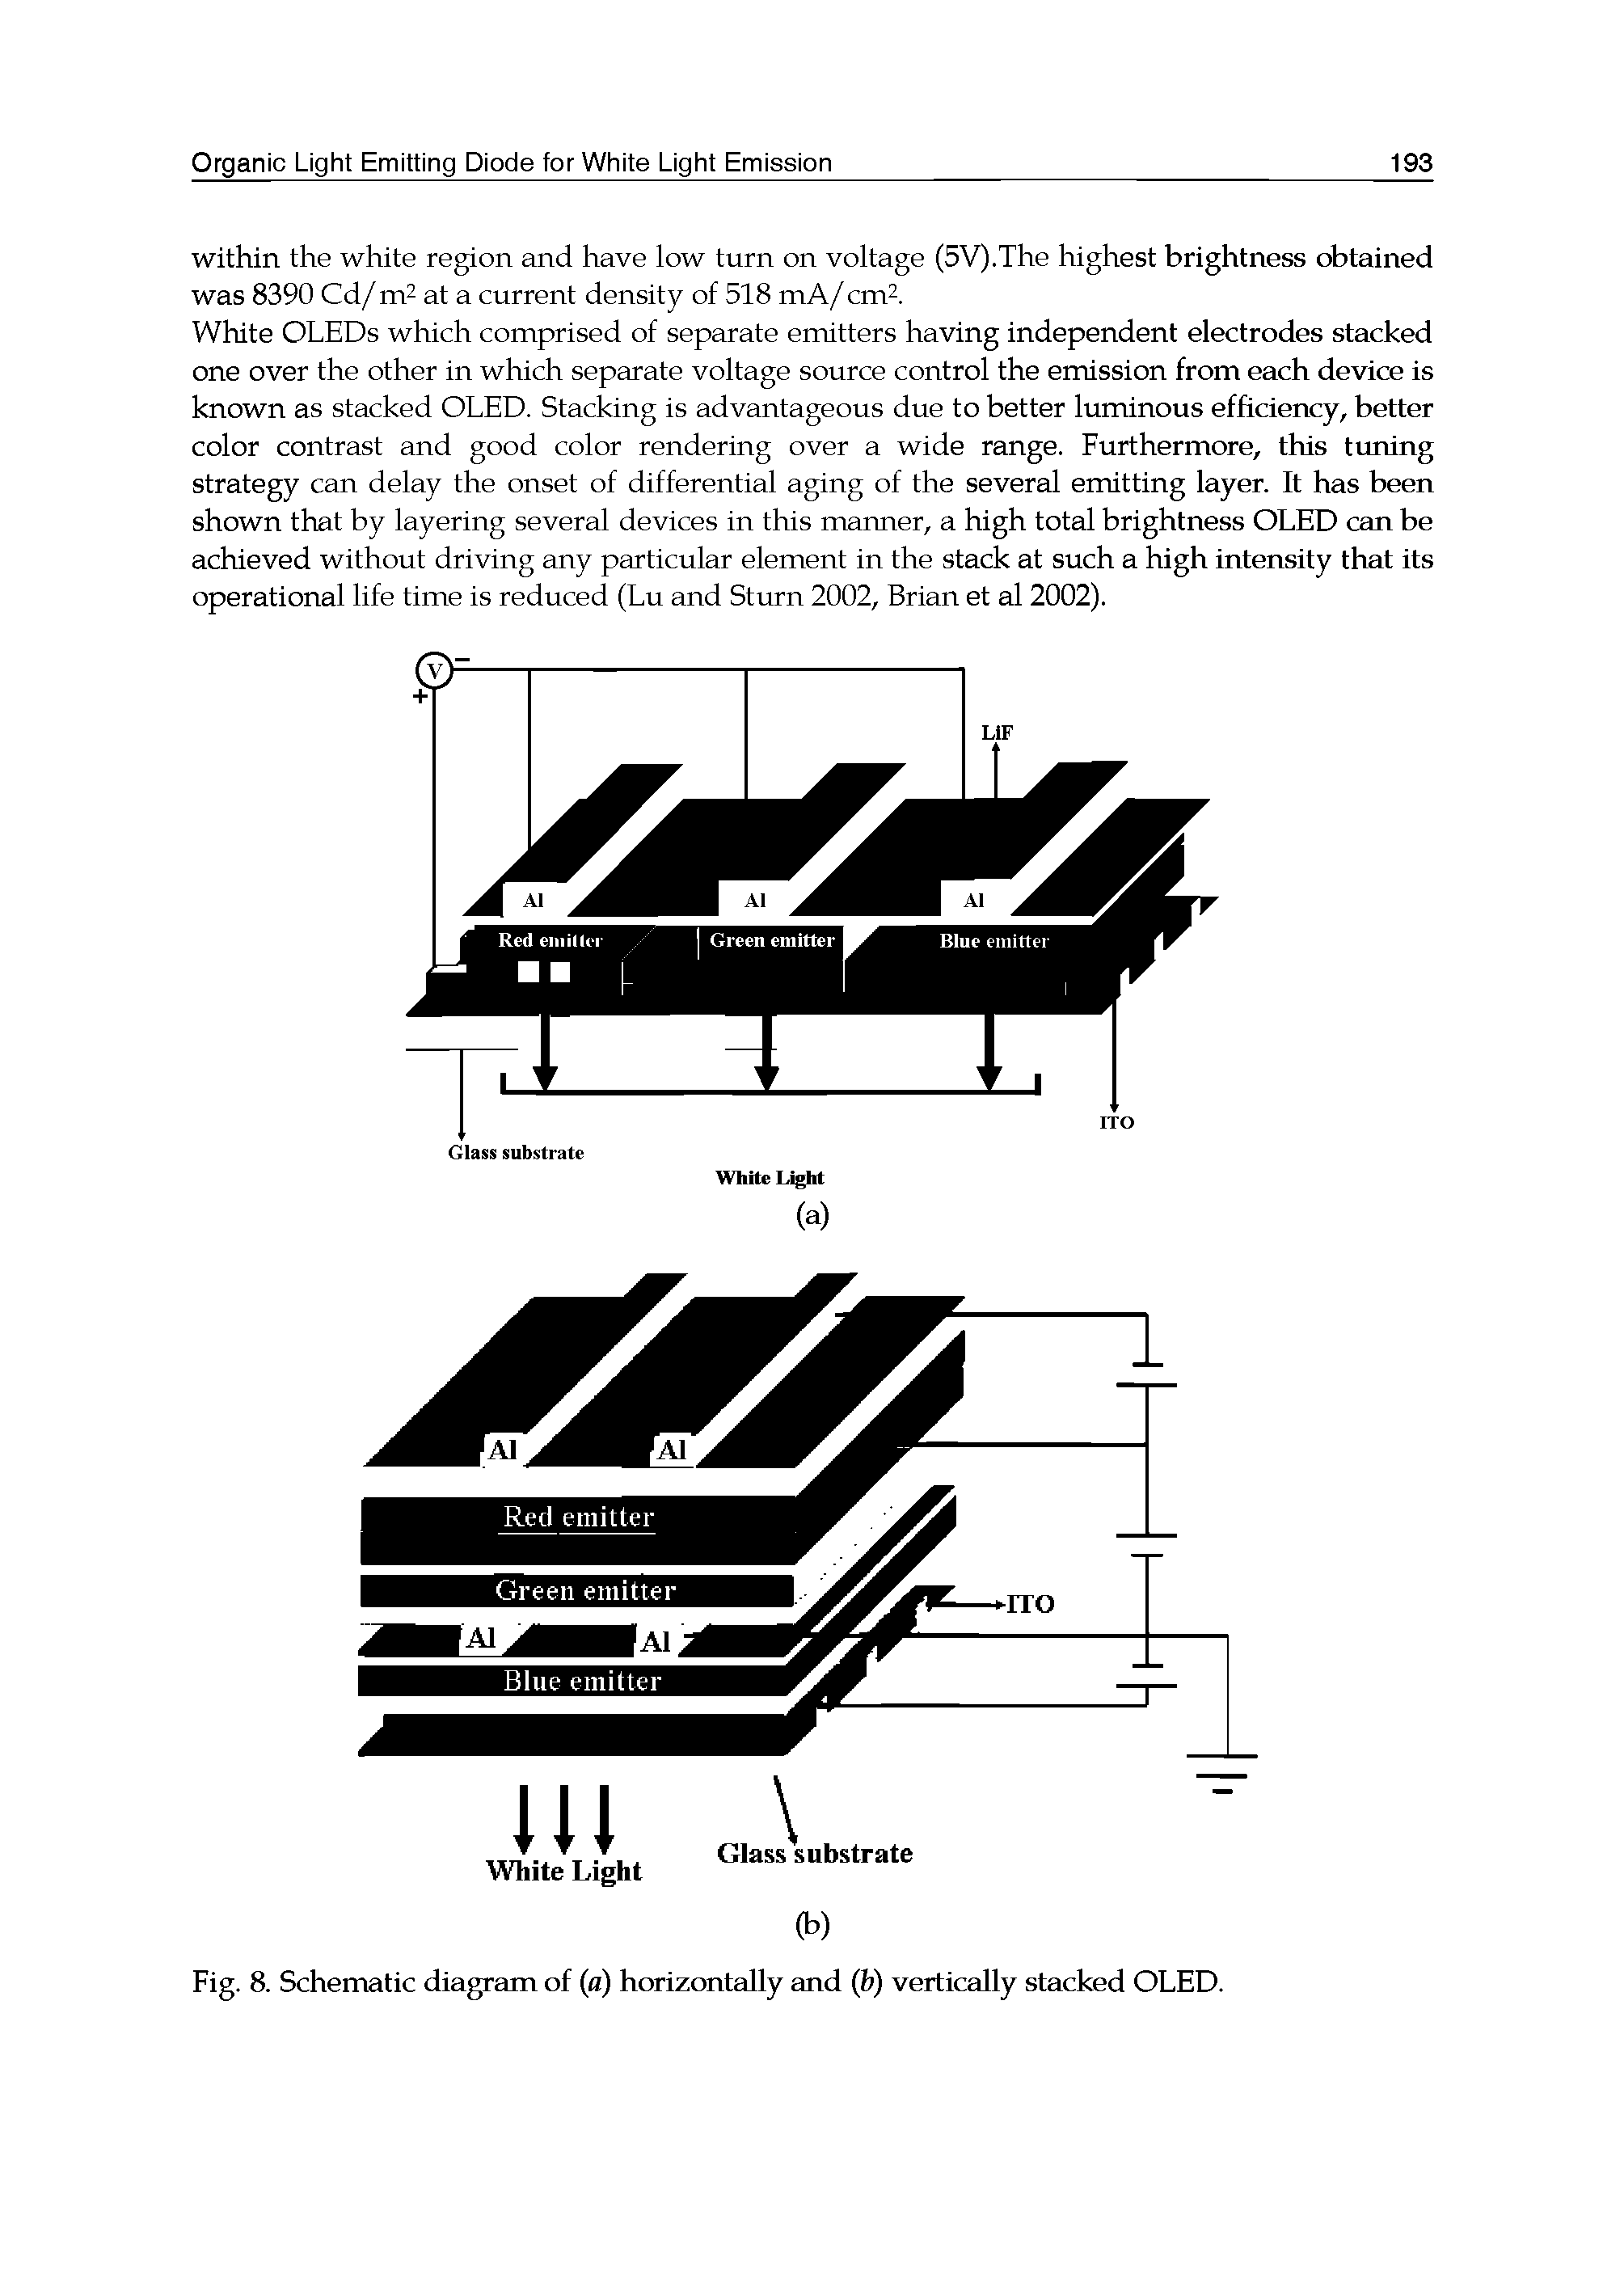 Fig. 8. Schematic diagram of (a) horizontally and (b) vertically stacked OLED.